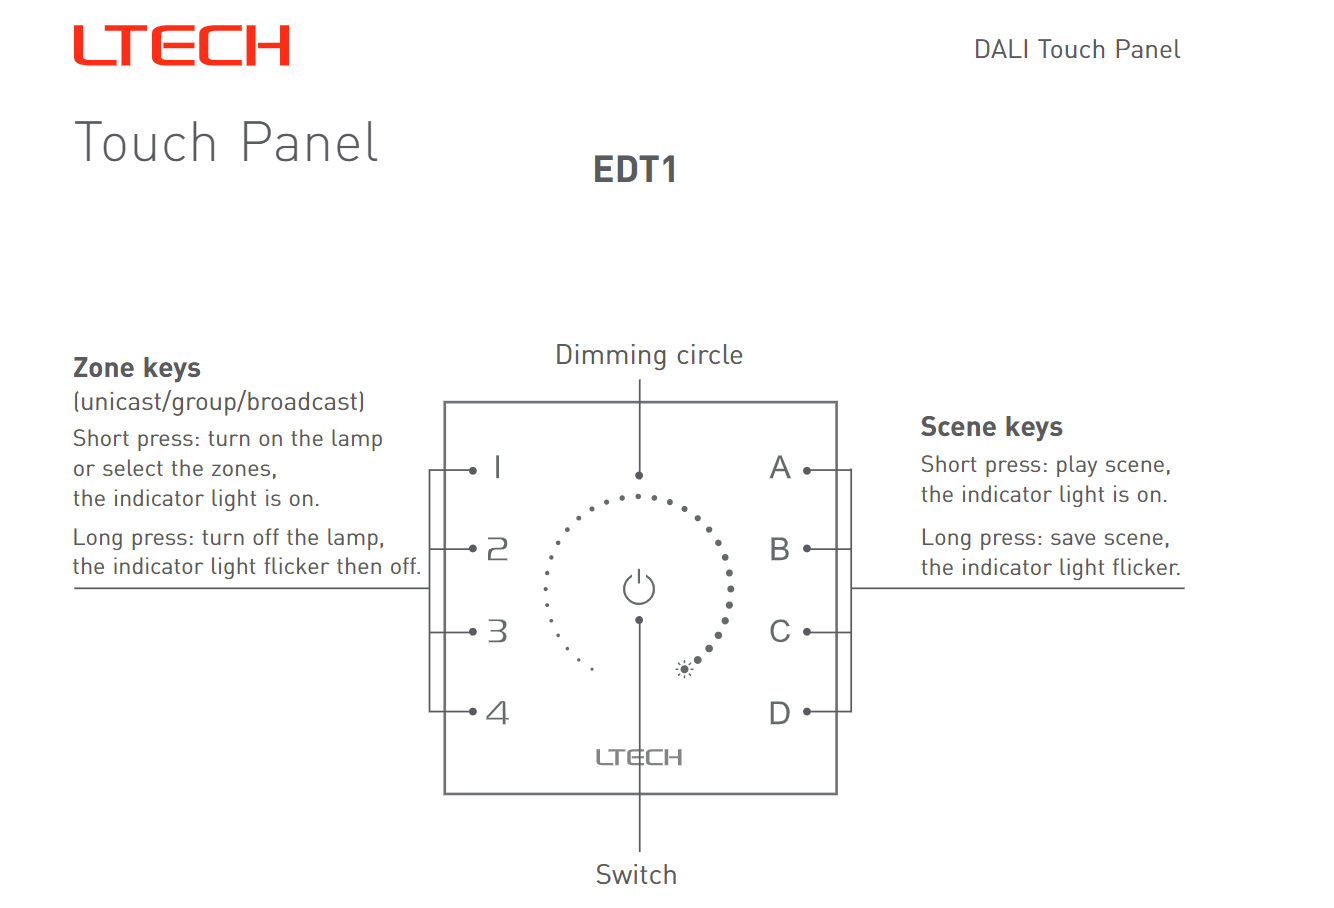 Ltech_EDT2_DALI_CT_Touch_Panel_Master_Led_Controller_6